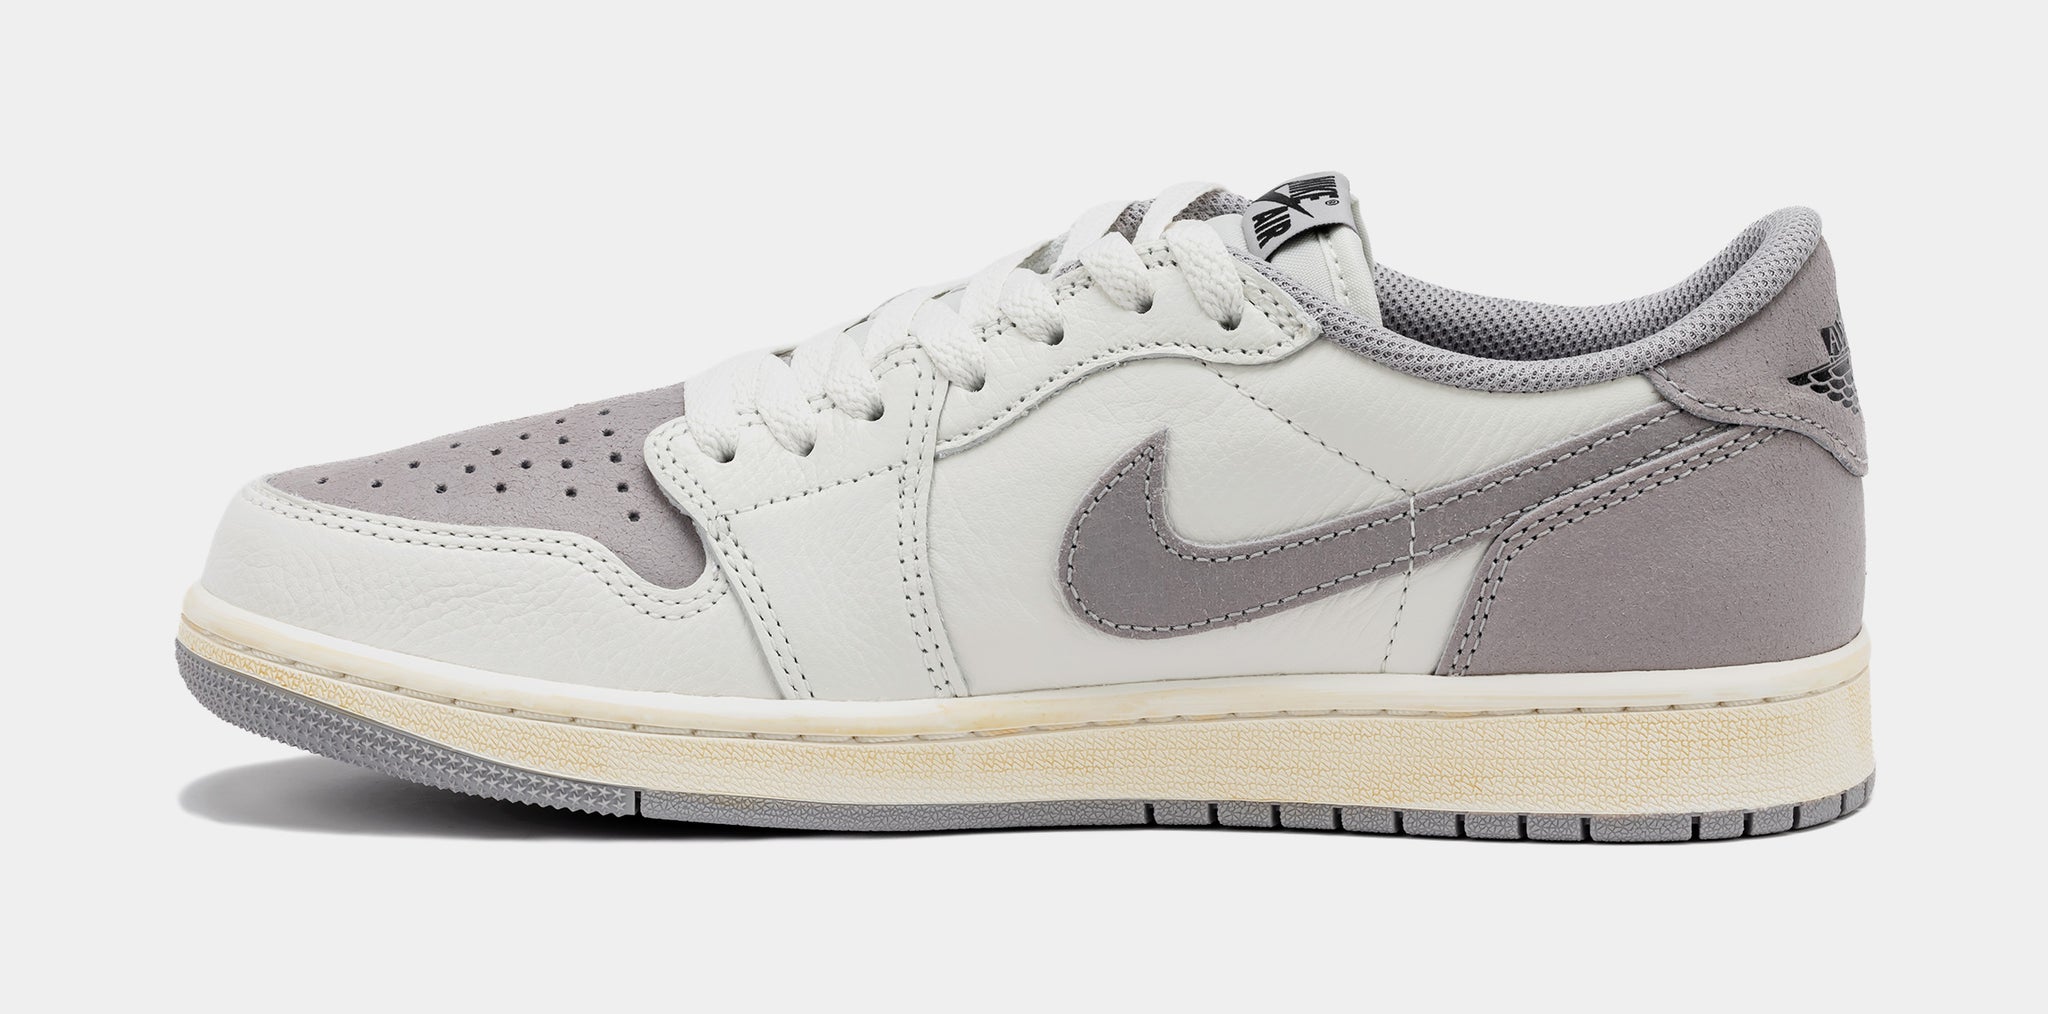 The Air Jordan 1 Low OG Atmosphere Grey will be one of many